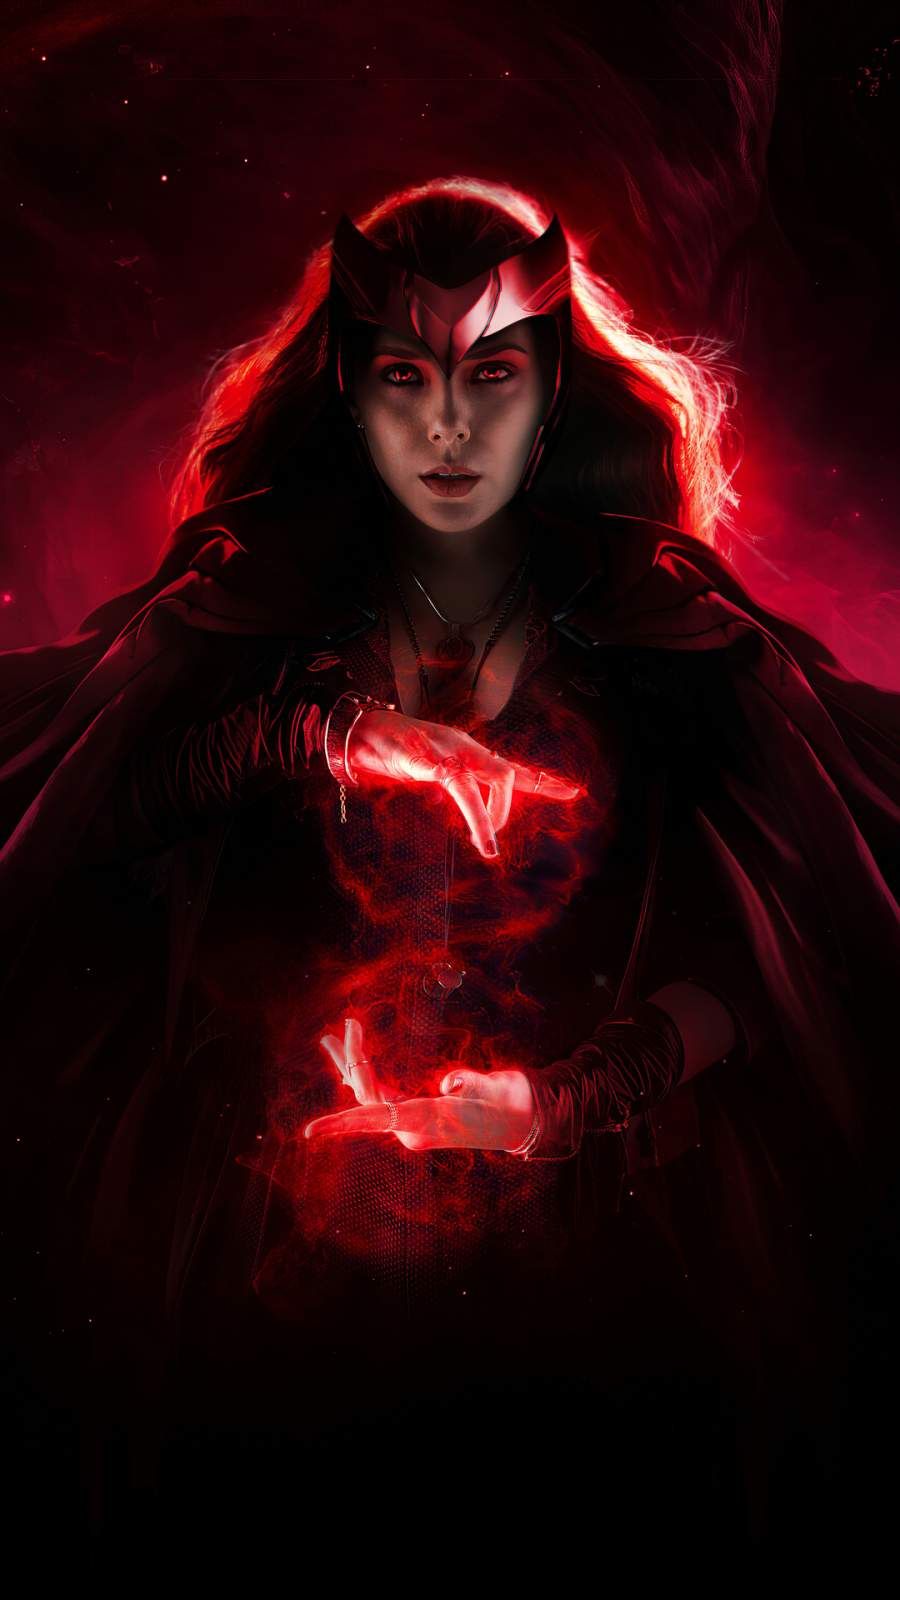 Scarlet Witch iPhone Wallpaper. Scarlet witch marvel, Scarlet witch avengers, Scarlet witch comic